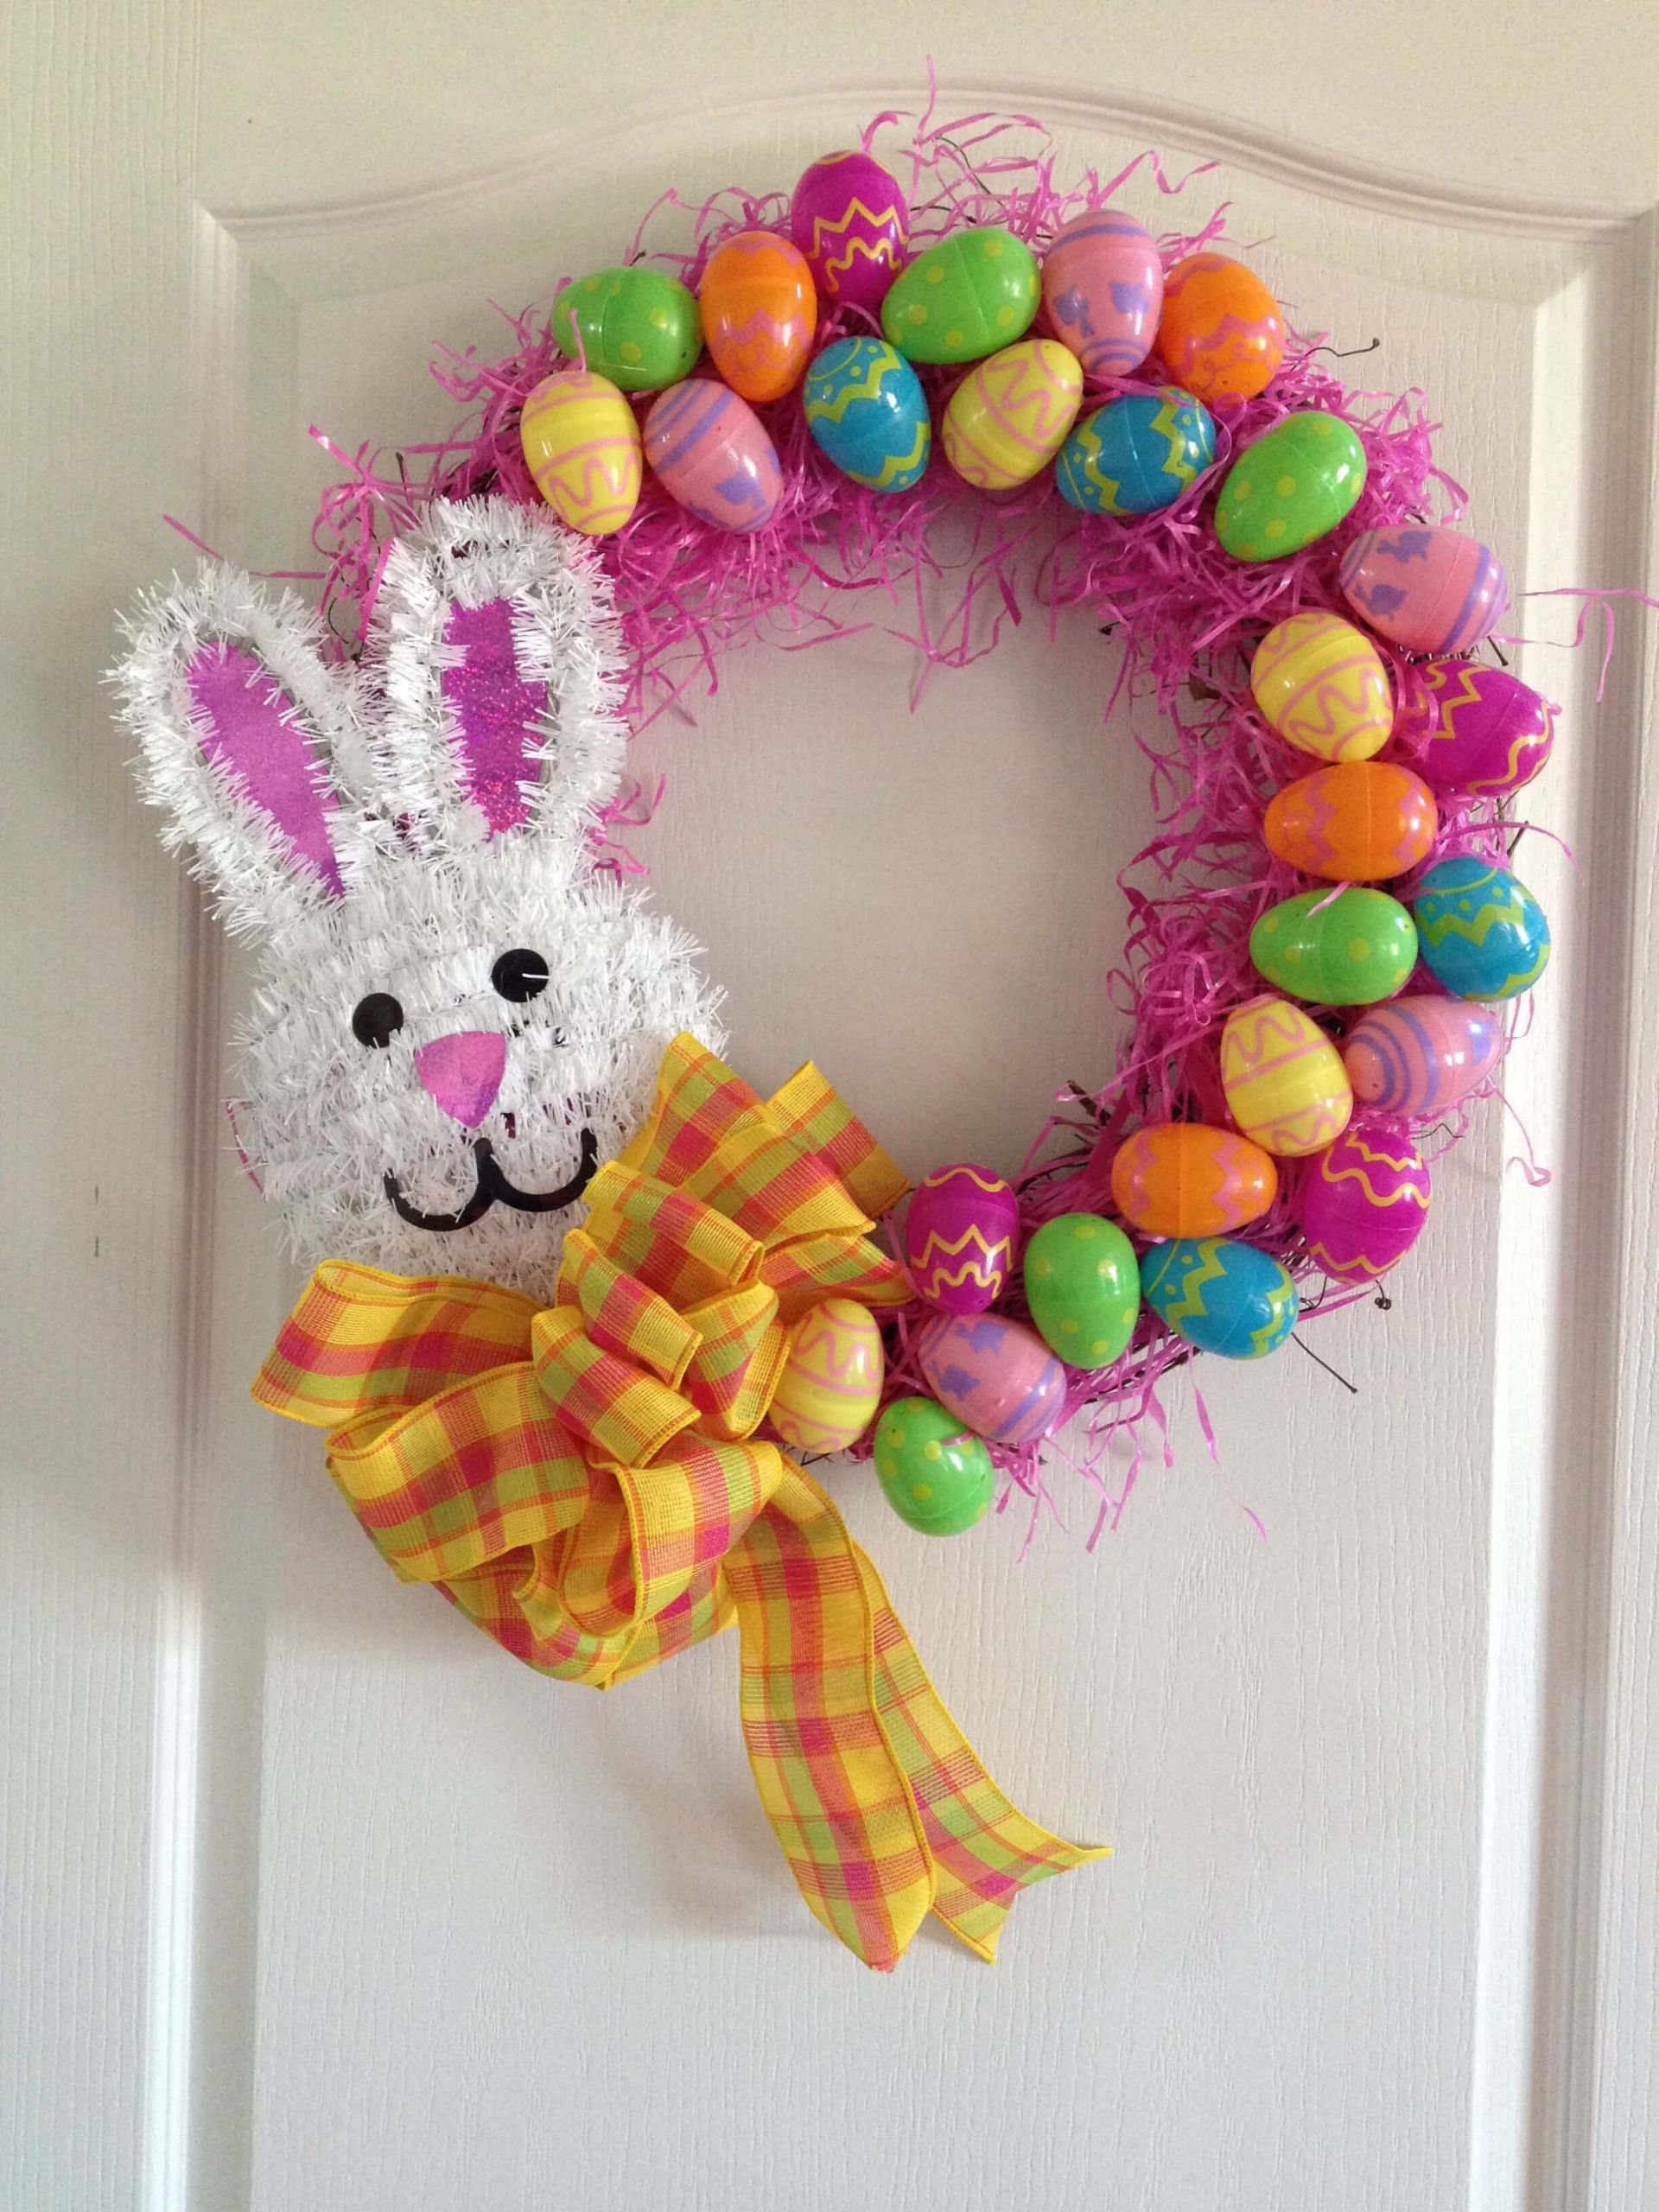 Easter Diy Projects
 10 DIY Easter Wreath Ideas To Brighten The Entrance